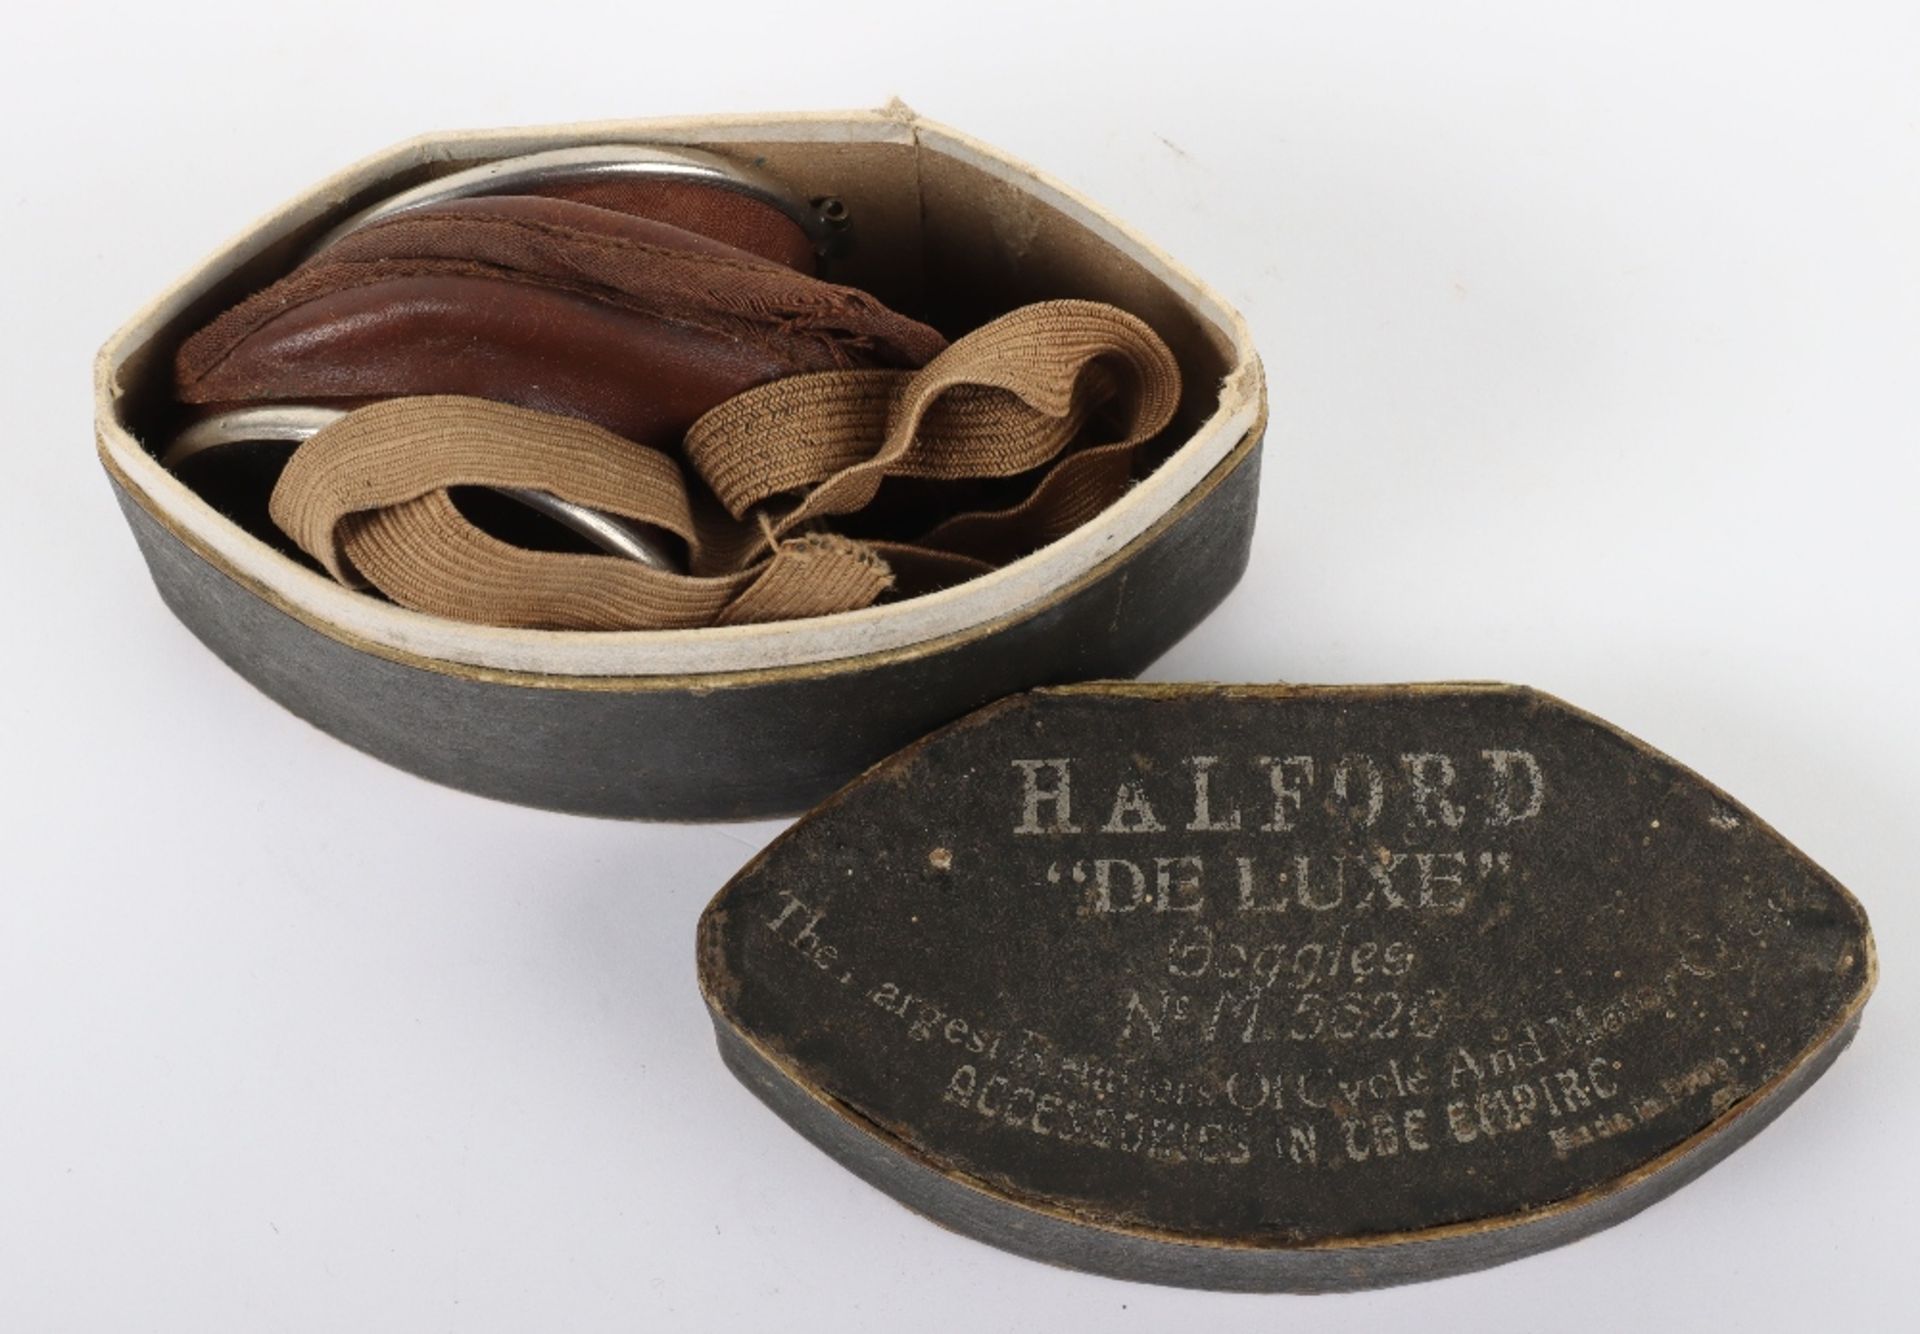 Pair of Early Aviation / Motoring Goggles “Halford Deluxe” - Image 5 of 5